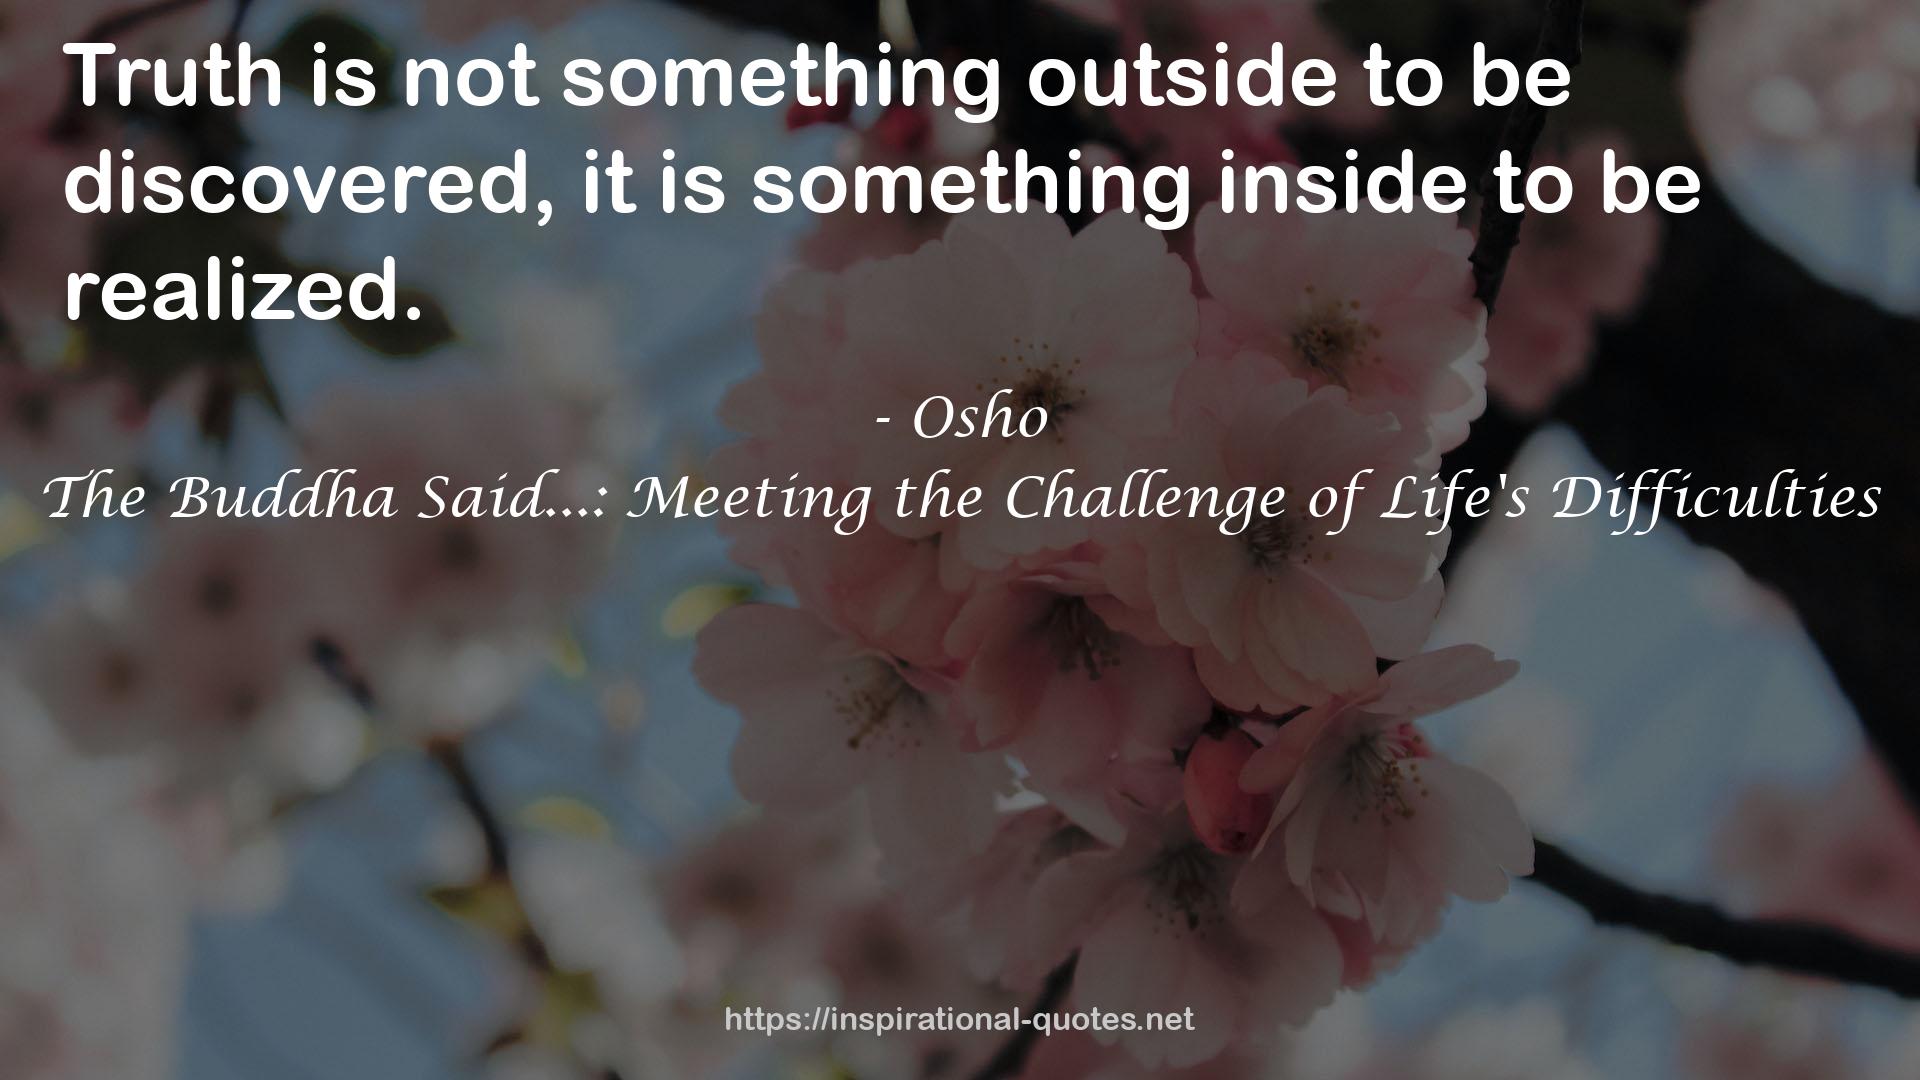 The Buddha Said...: Meeting the Challenge of Life's Difficulties QUOTES